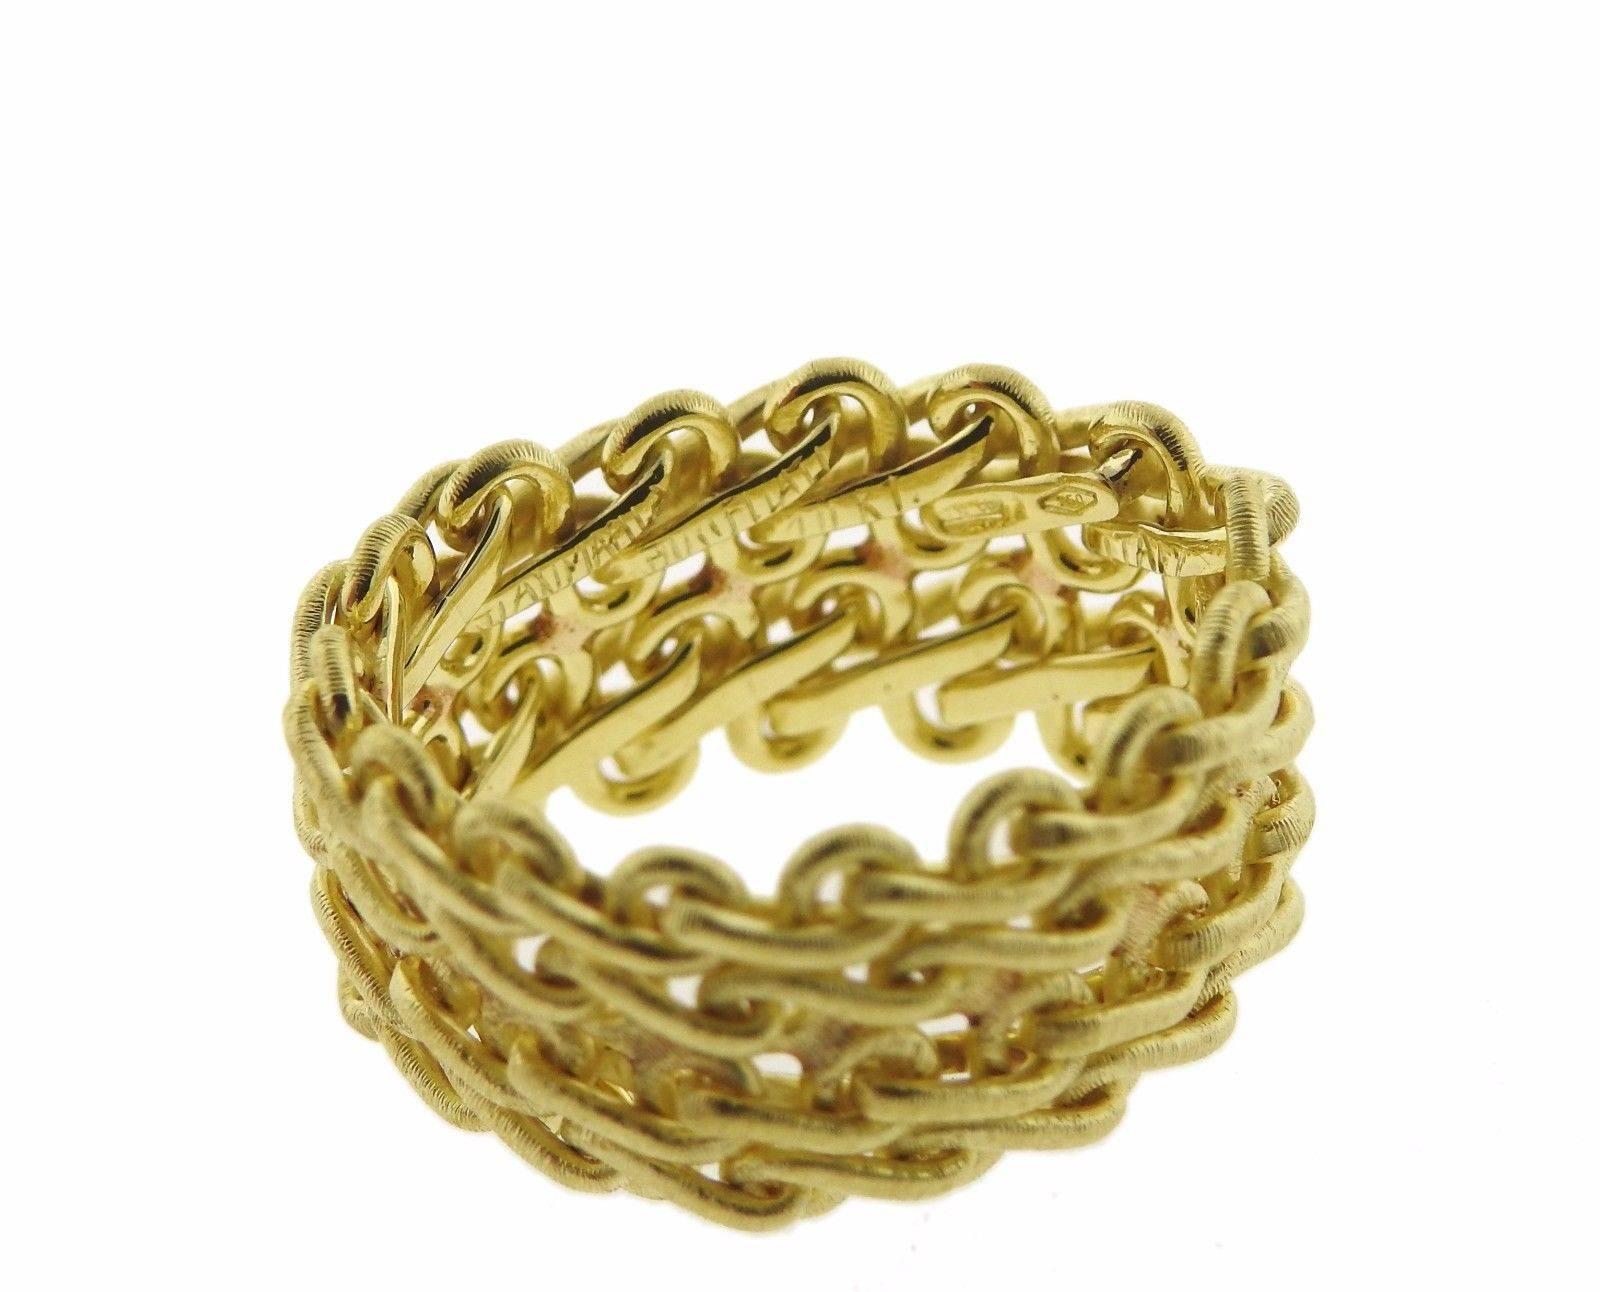 An 18k yellow gold ring by Gianmaria Buccellati.  The ring is a size 6 and is 11.5mm wide.  The weight of the piece is 10 grams.  Marked: Gianmaria Buccellati 750 Italy 18kt.  The current retail is $3760.